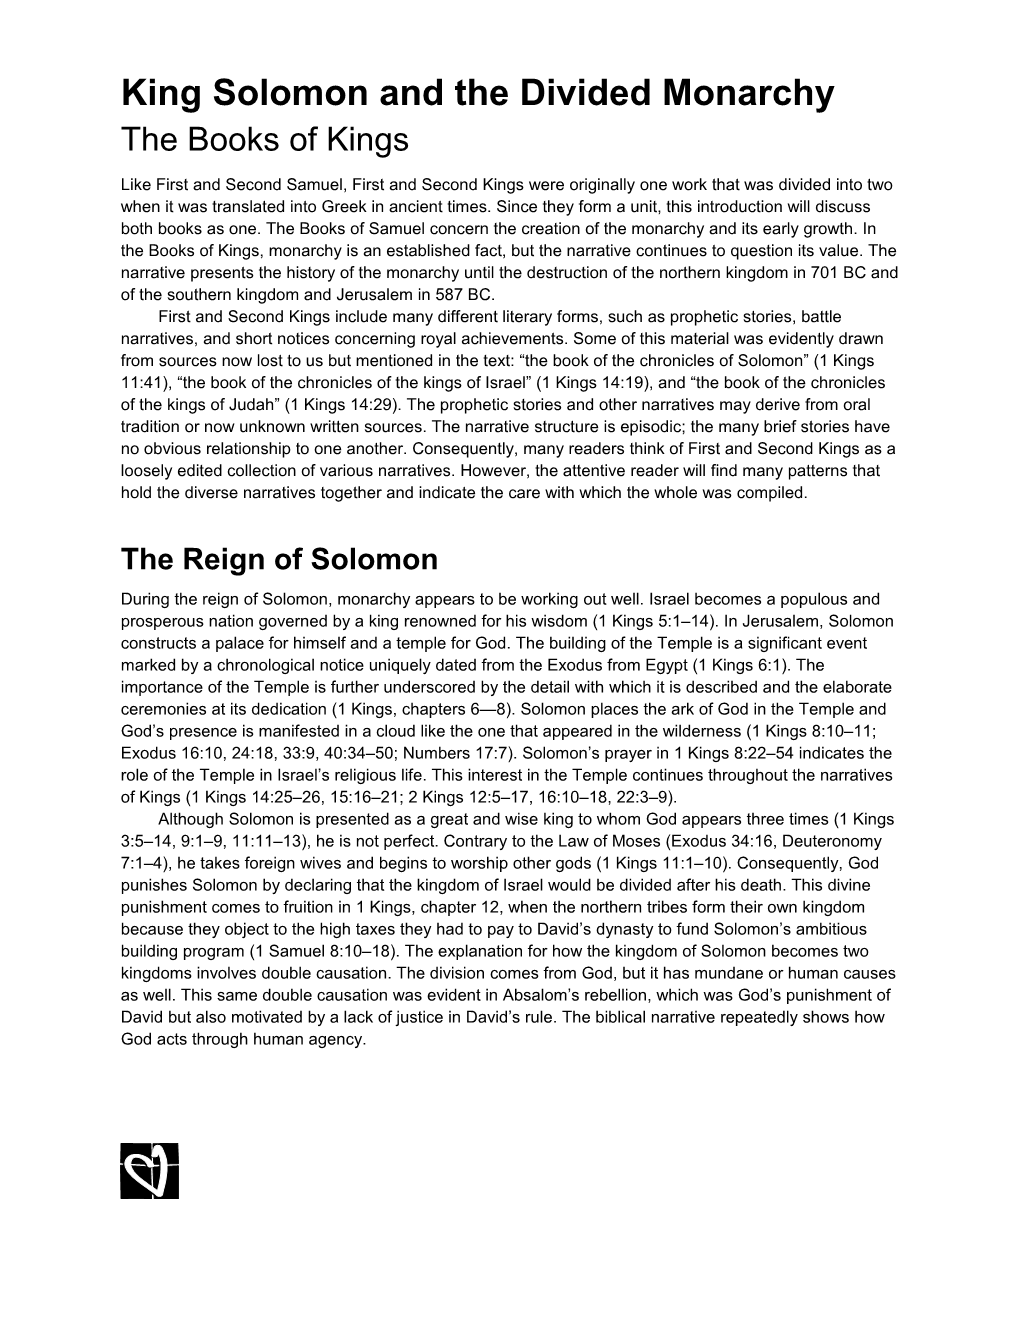 King Solomon and the Divided Monarchypage 1